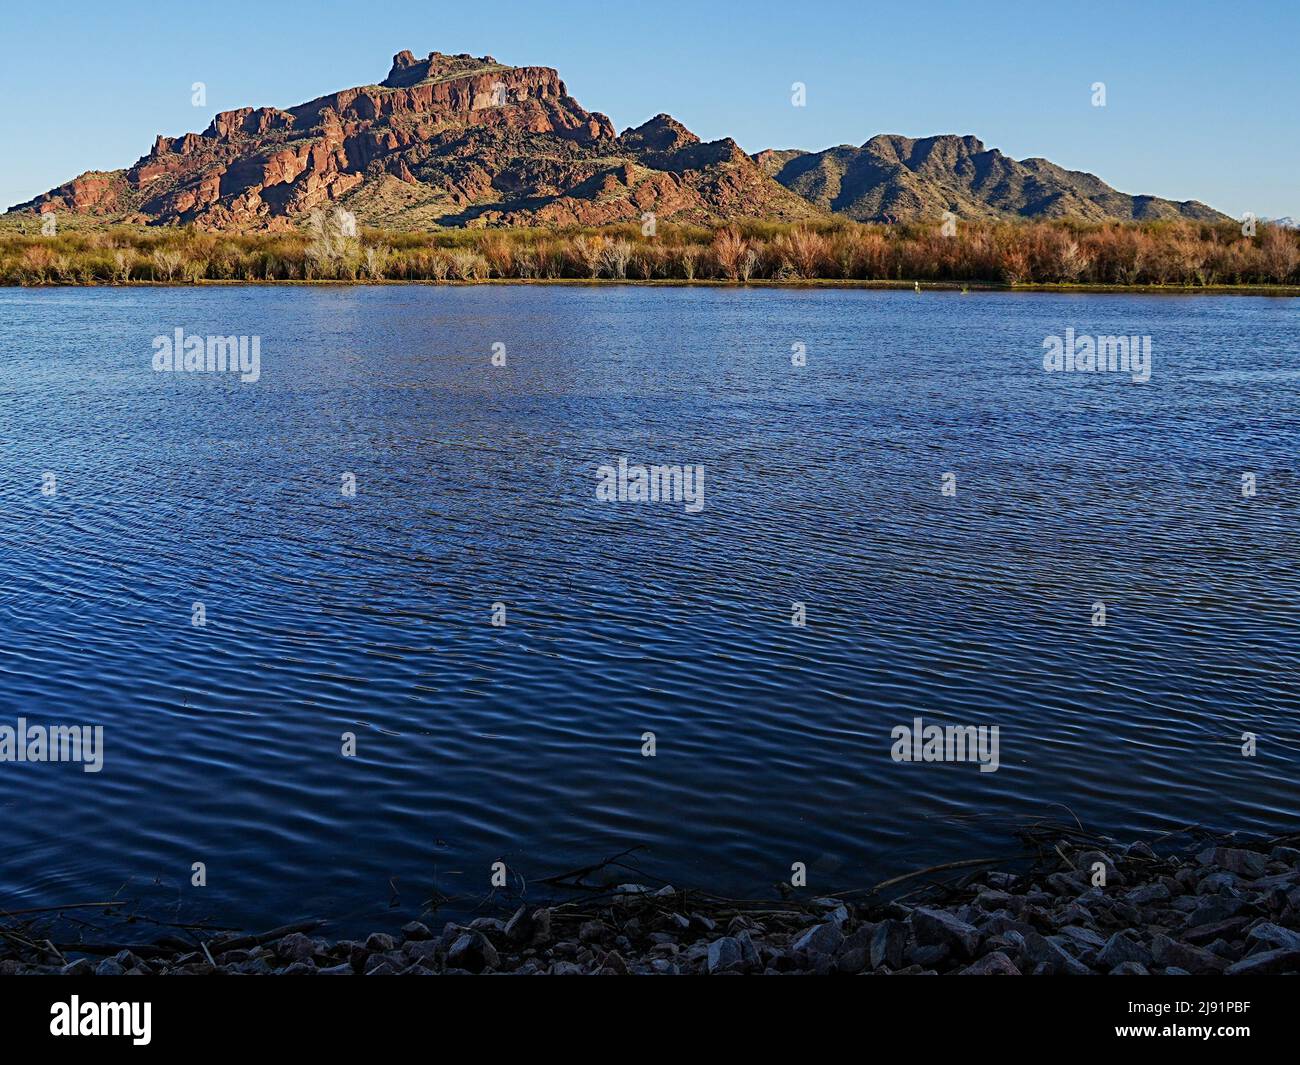 Red Mountain in Mesa, Arizona is framed by various desert bushes and trees that populate the banks of the Salt River Stock Photo